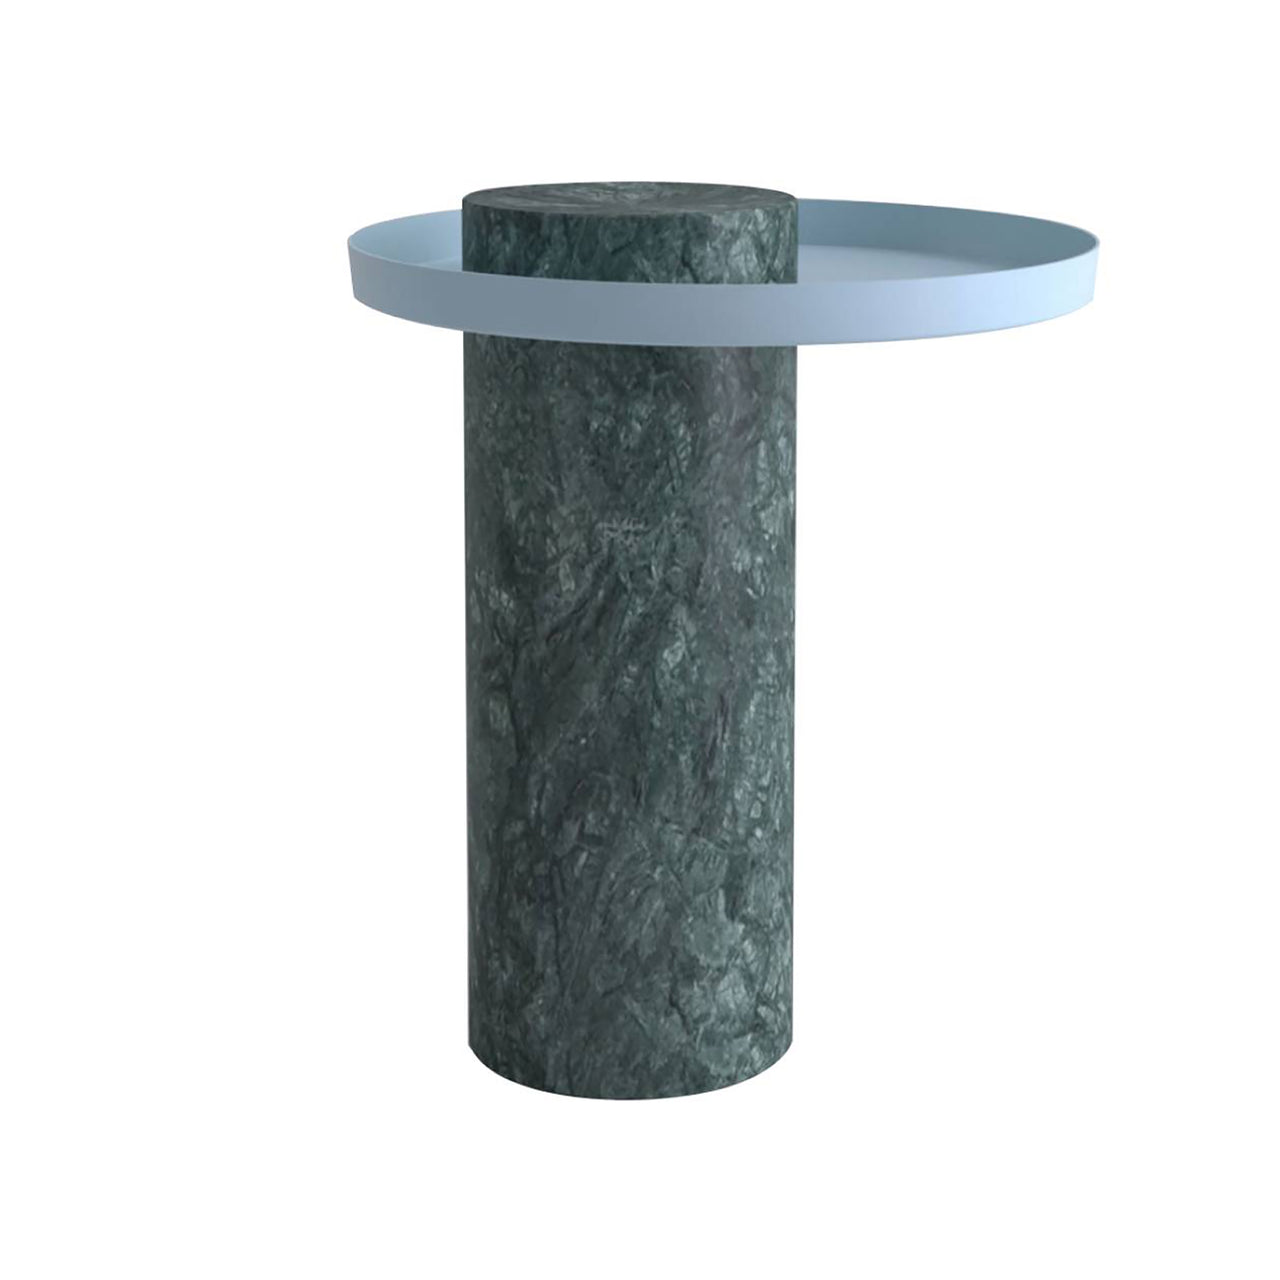 Salute Side Table: Medium + Indian Green Marble + Light Blue